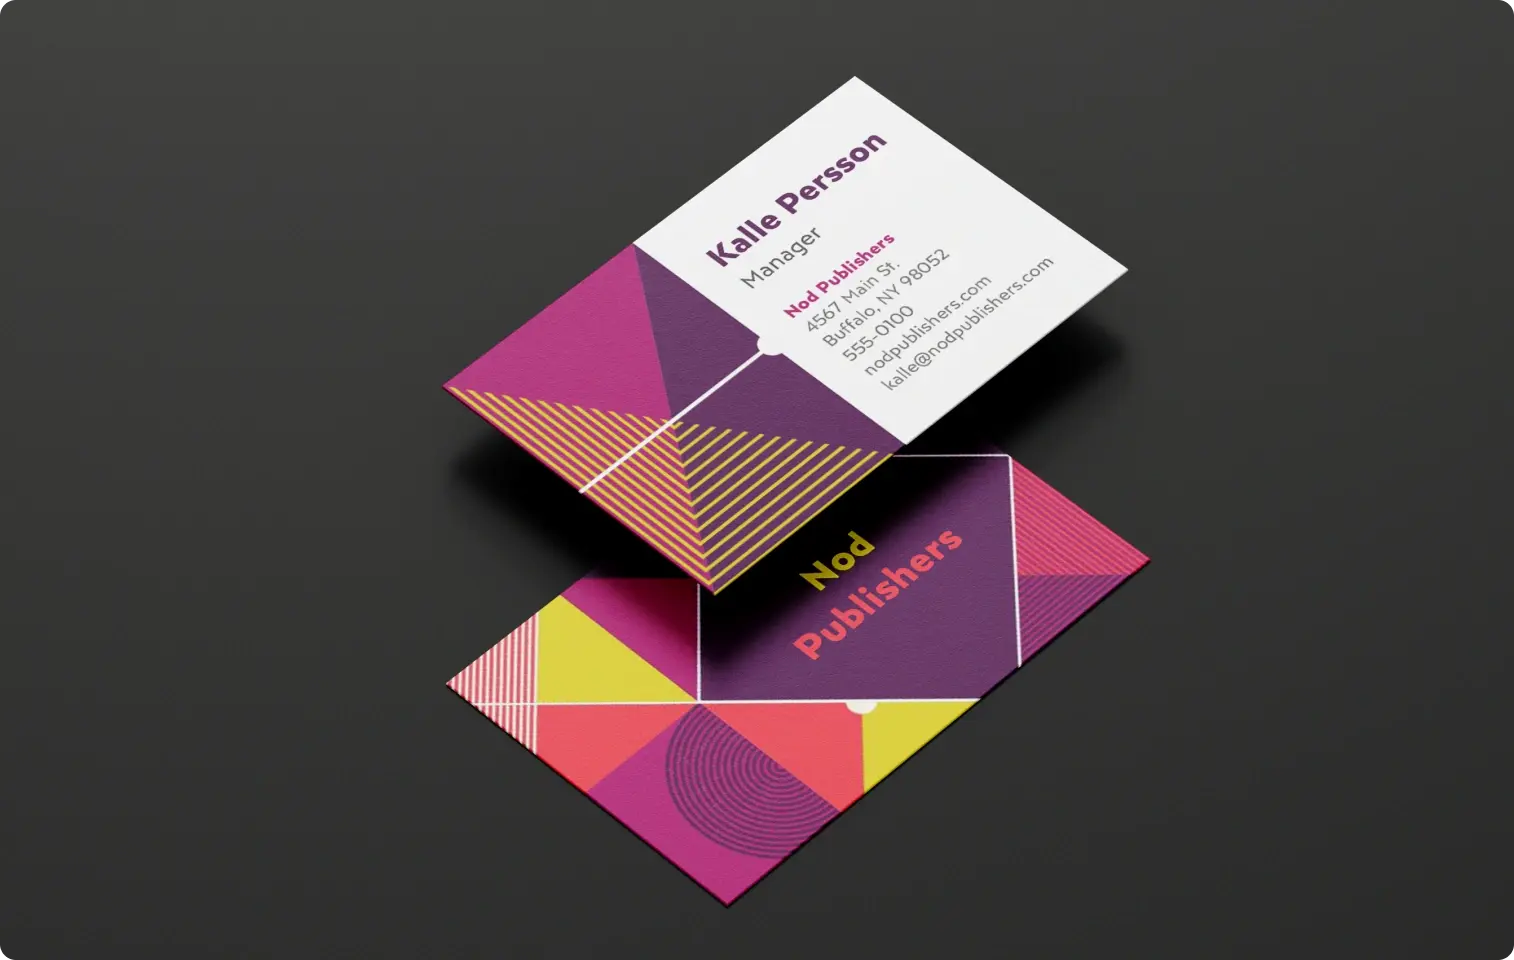 Business card with the business name prominently positioned. Themed in colors of purple, yellow, orange, and white. 